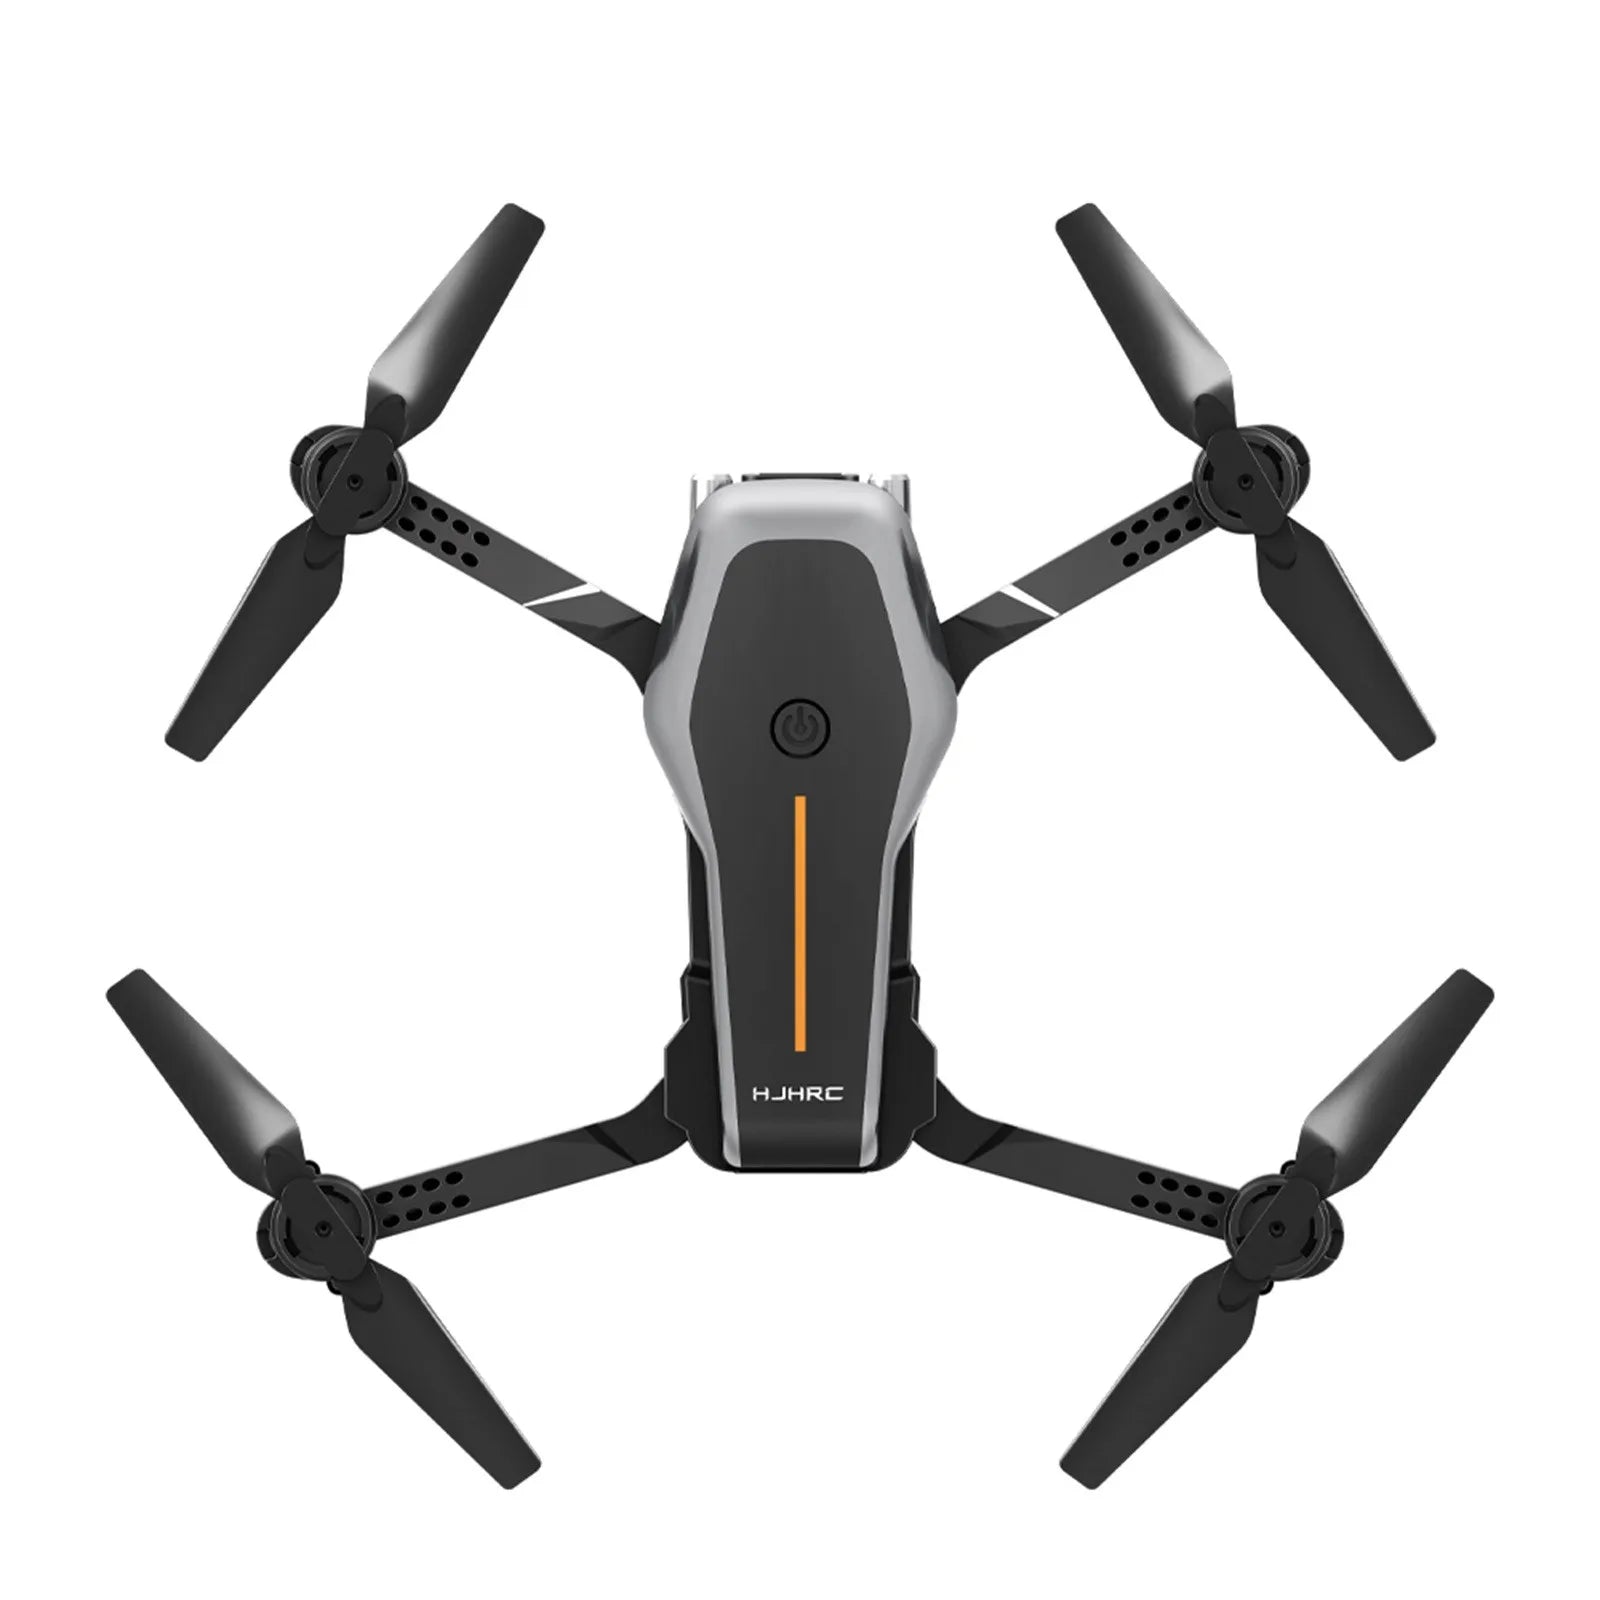 HJ95 Drone, foldable arm, small size, light weight, easy to carry 